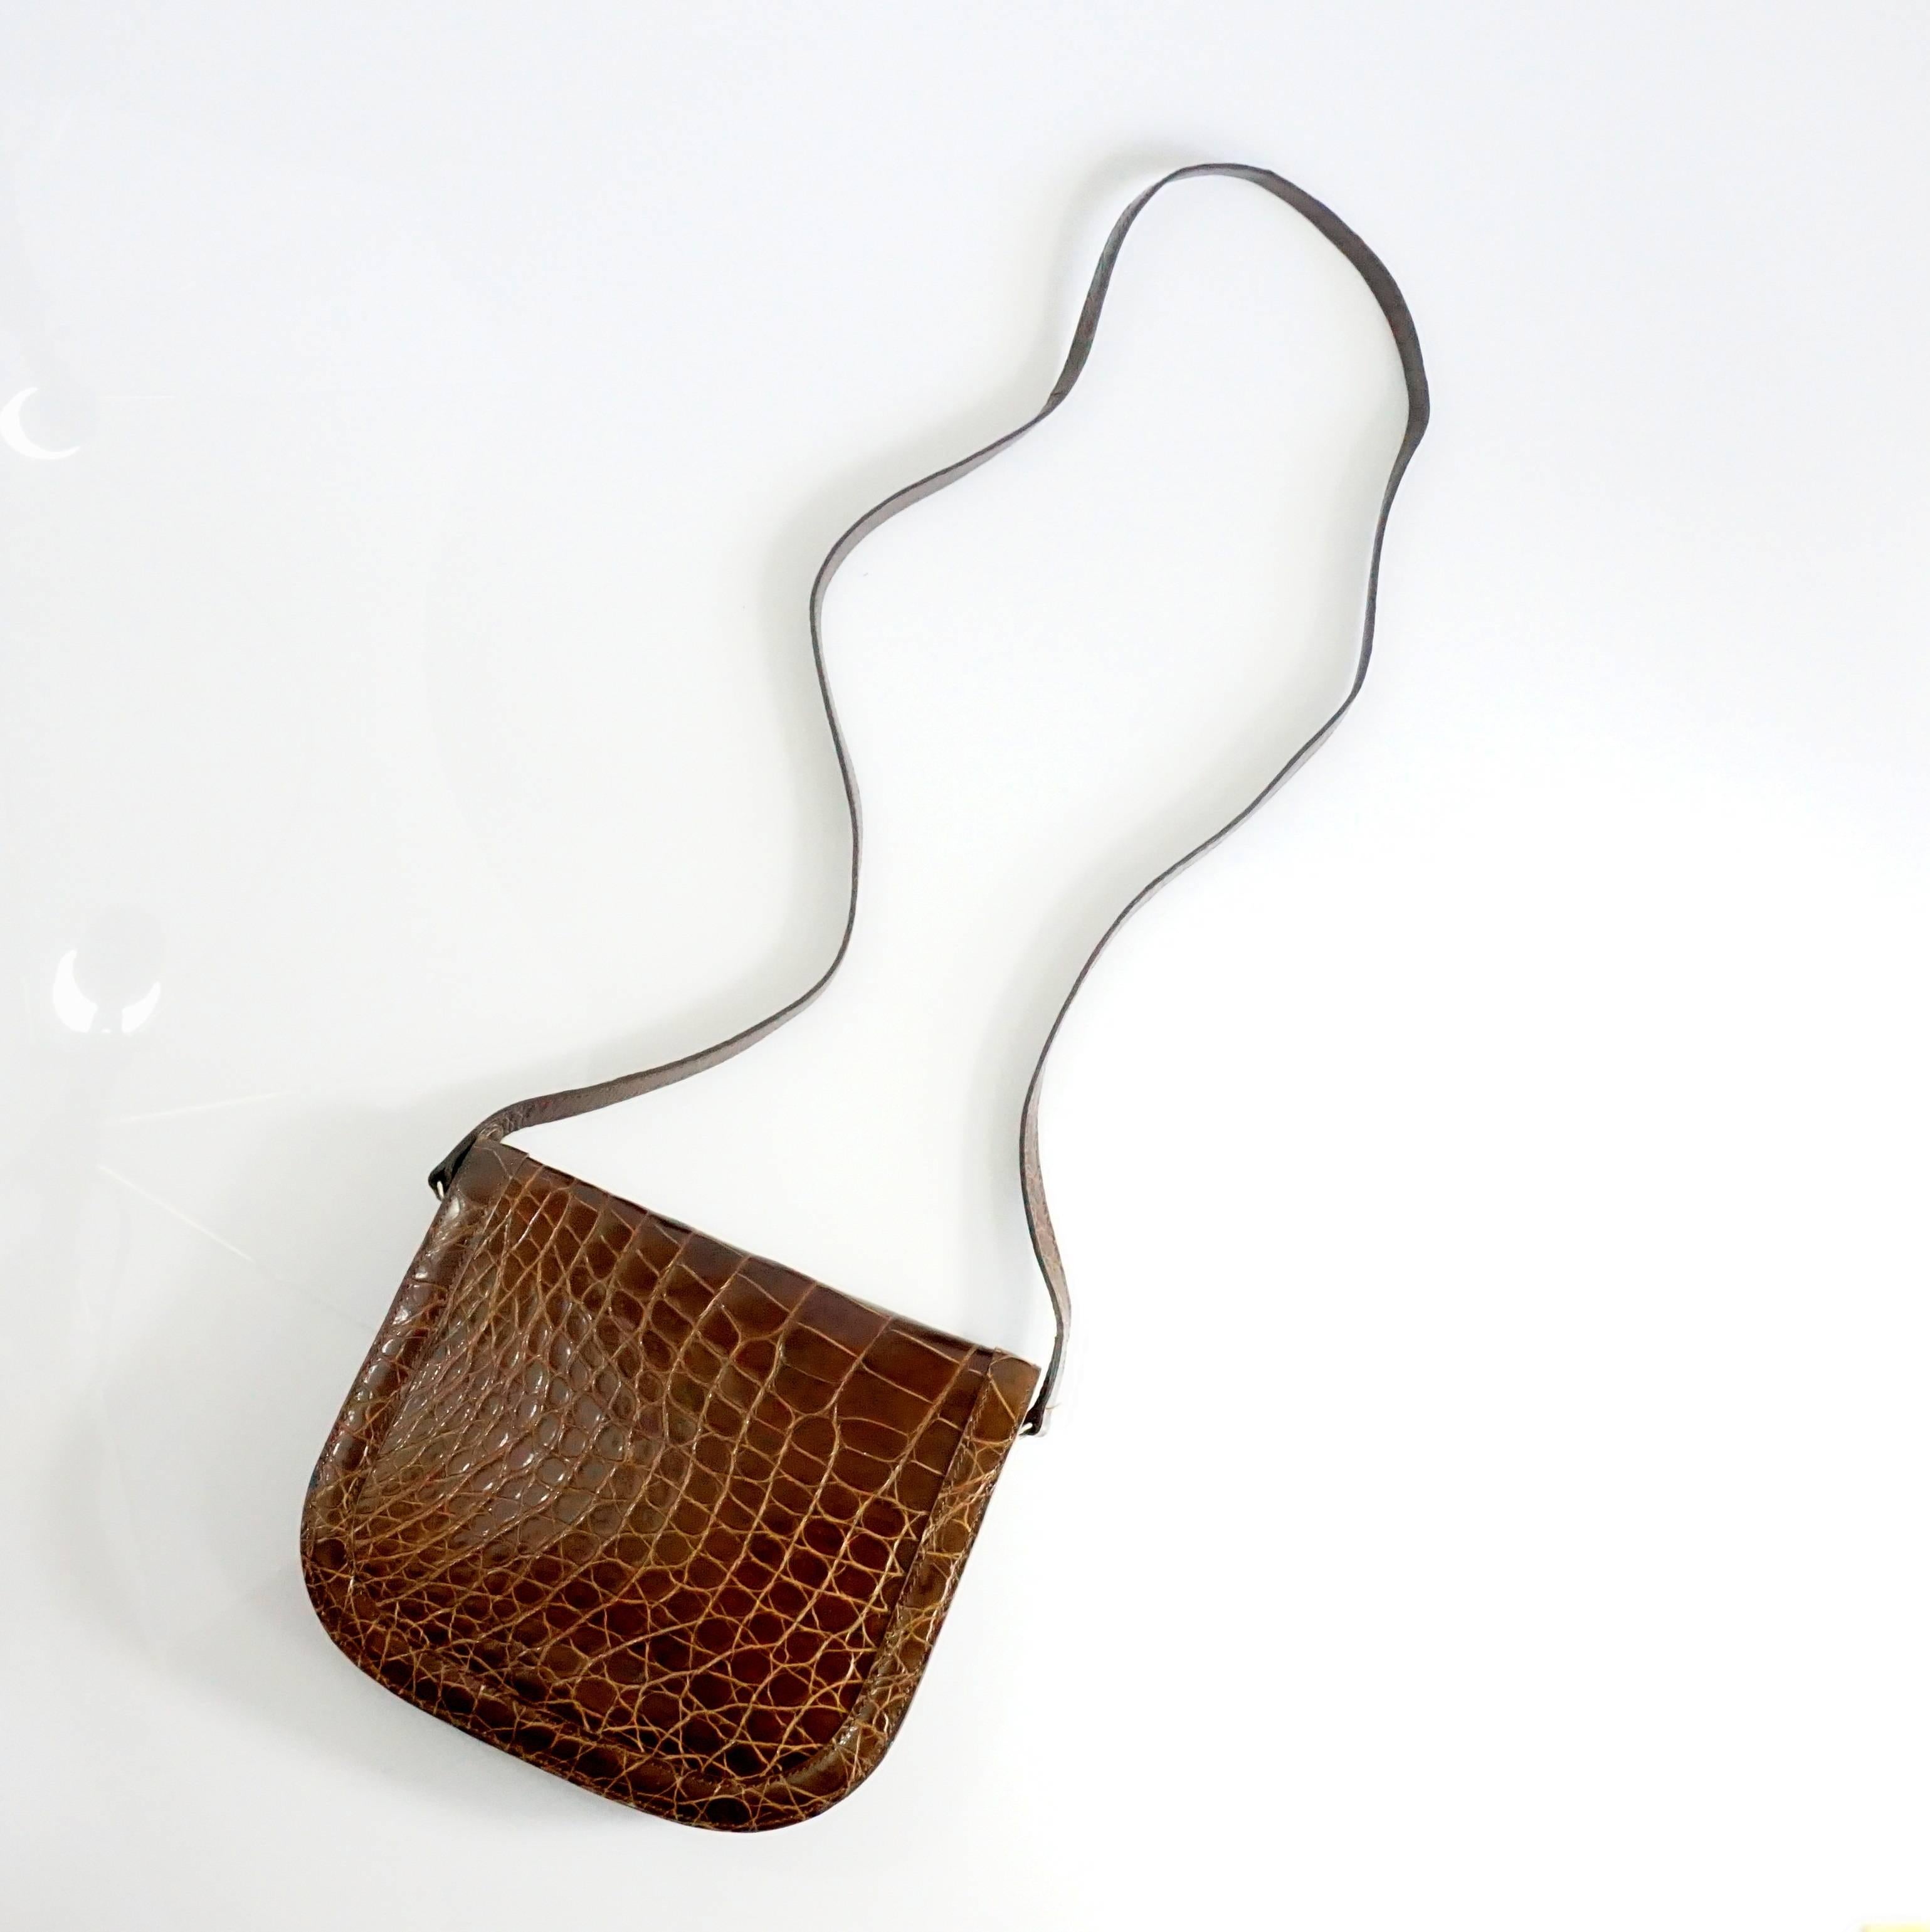 This Lanvin crossbody bag is made of brown alligator. It has a flap closure and the inside is split into two parts. This bag is in excellent condition. Circa 1960's. 

Measurements
Height: 7